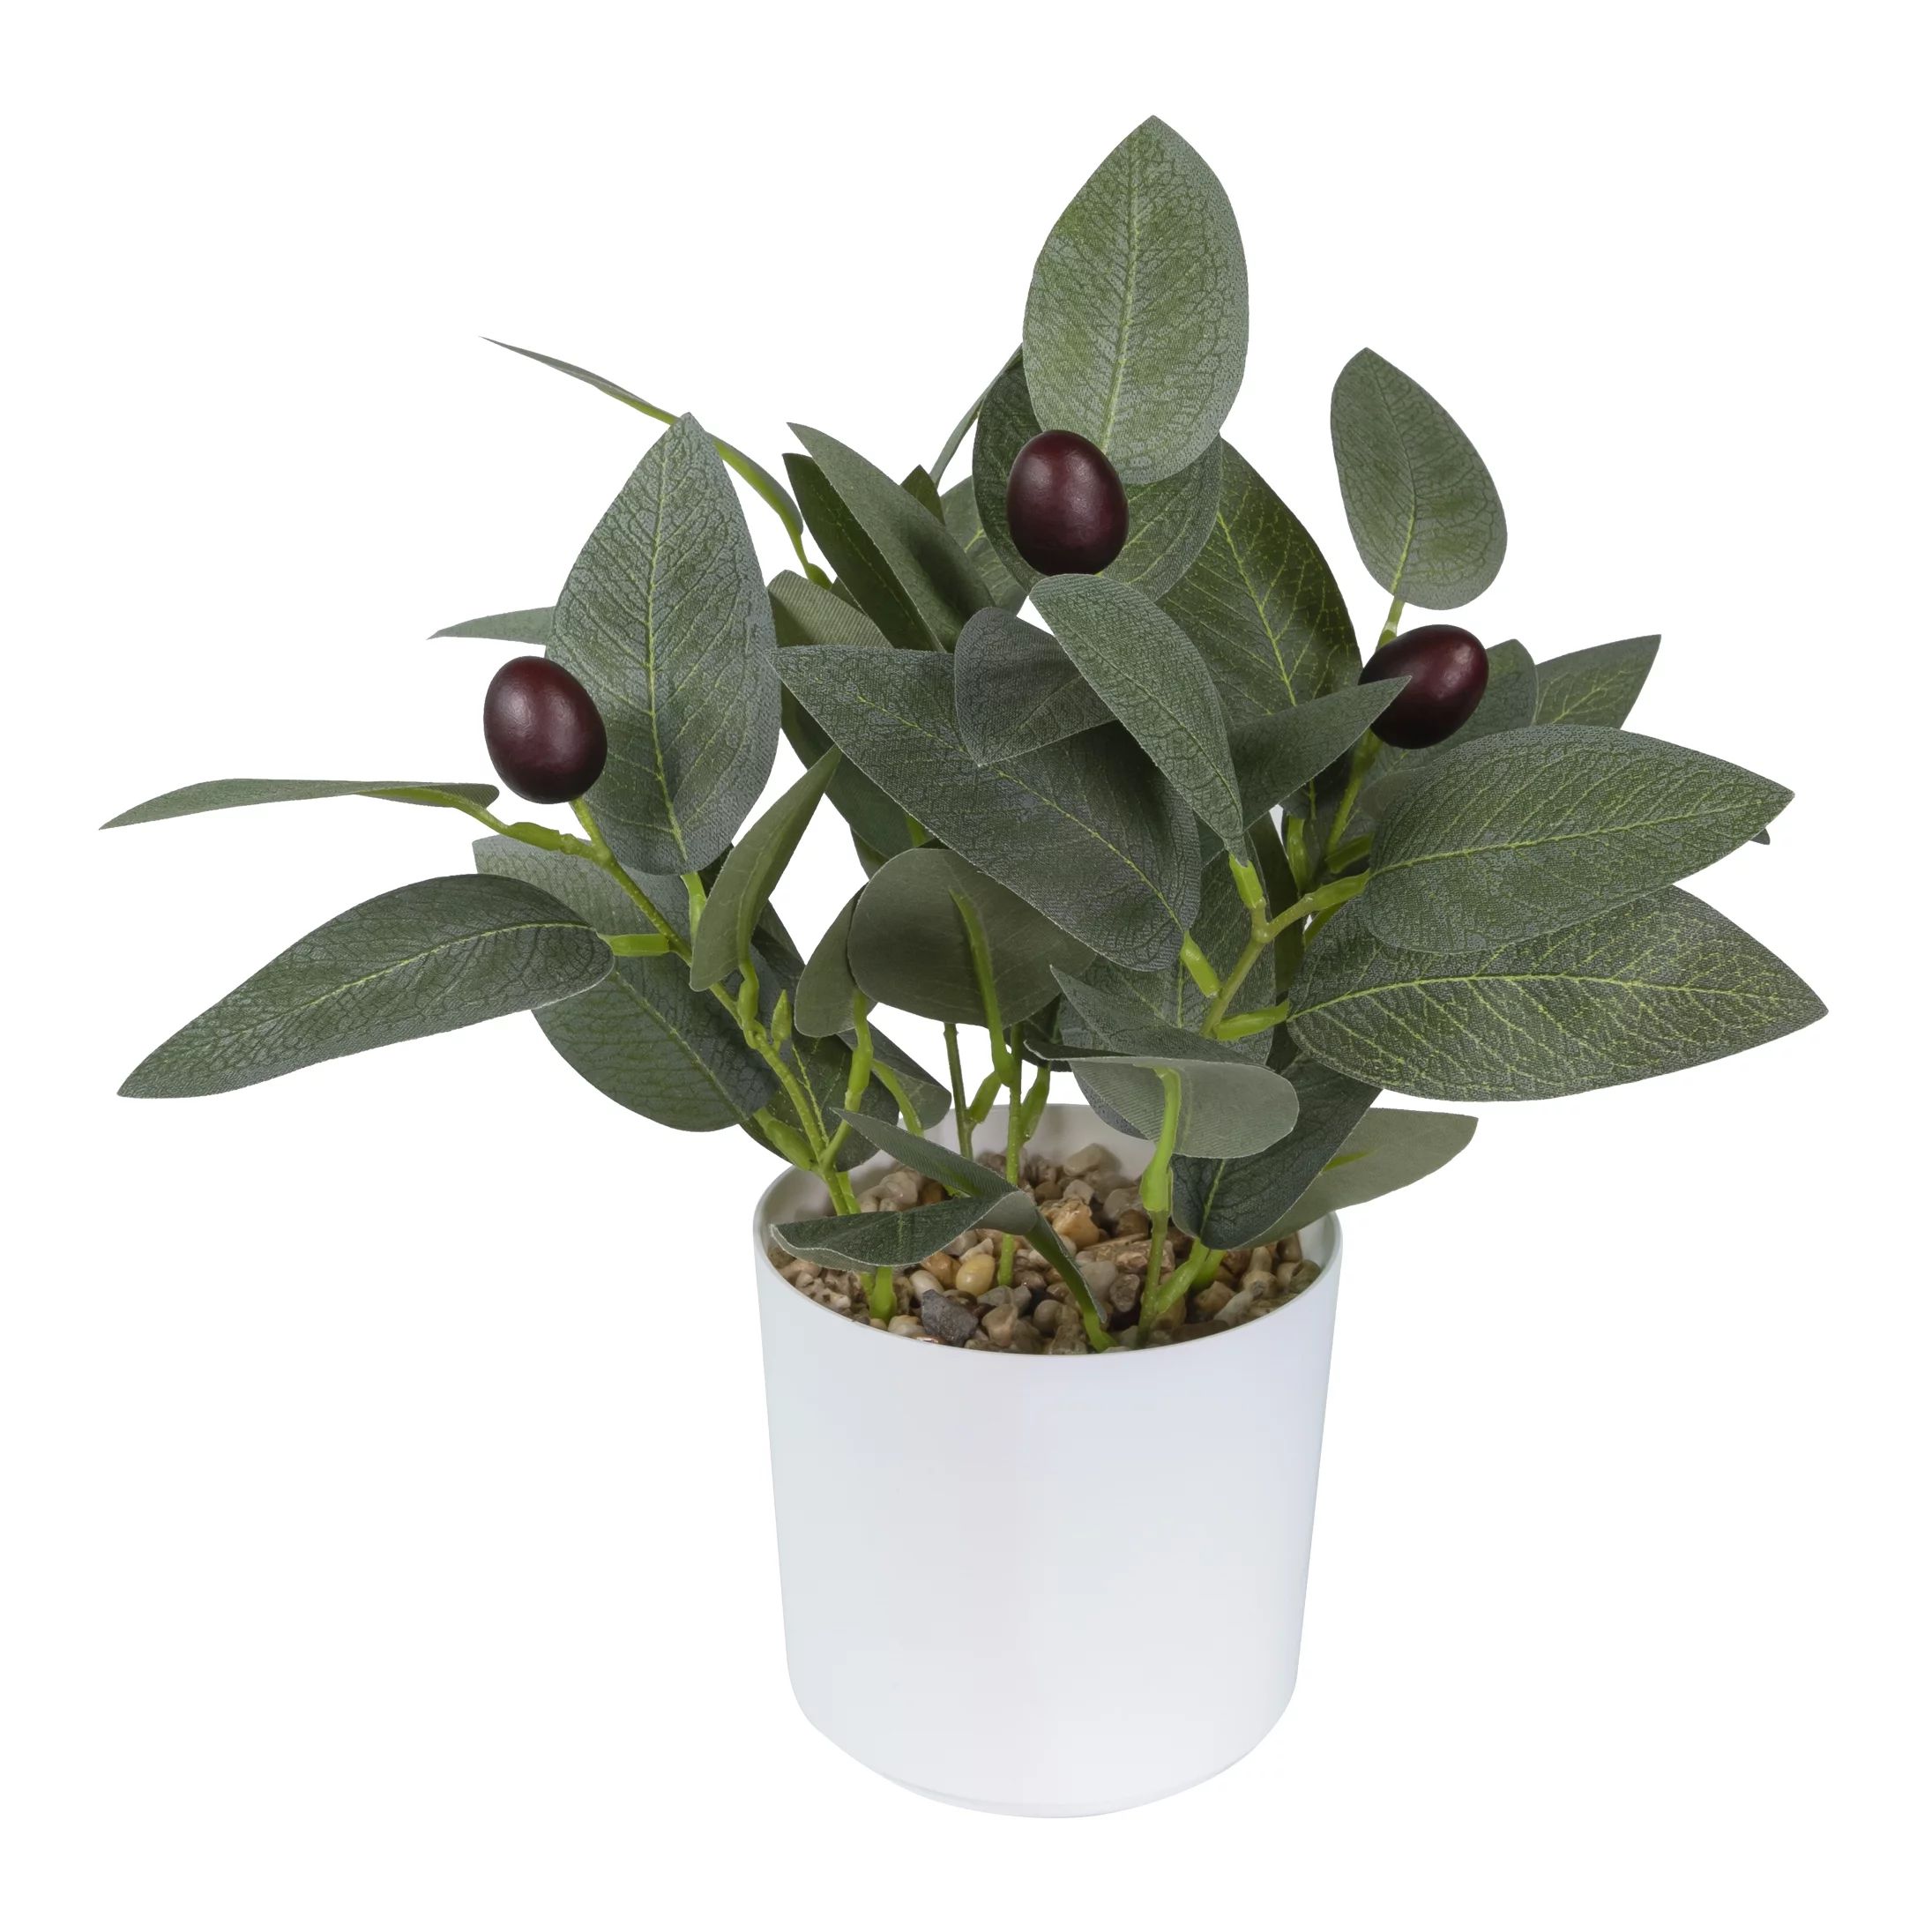 Mainstays Indoor 10" x 4" Artificial Olive Leaf Plant in White Pot, Green, 1pc | Walmart (US)